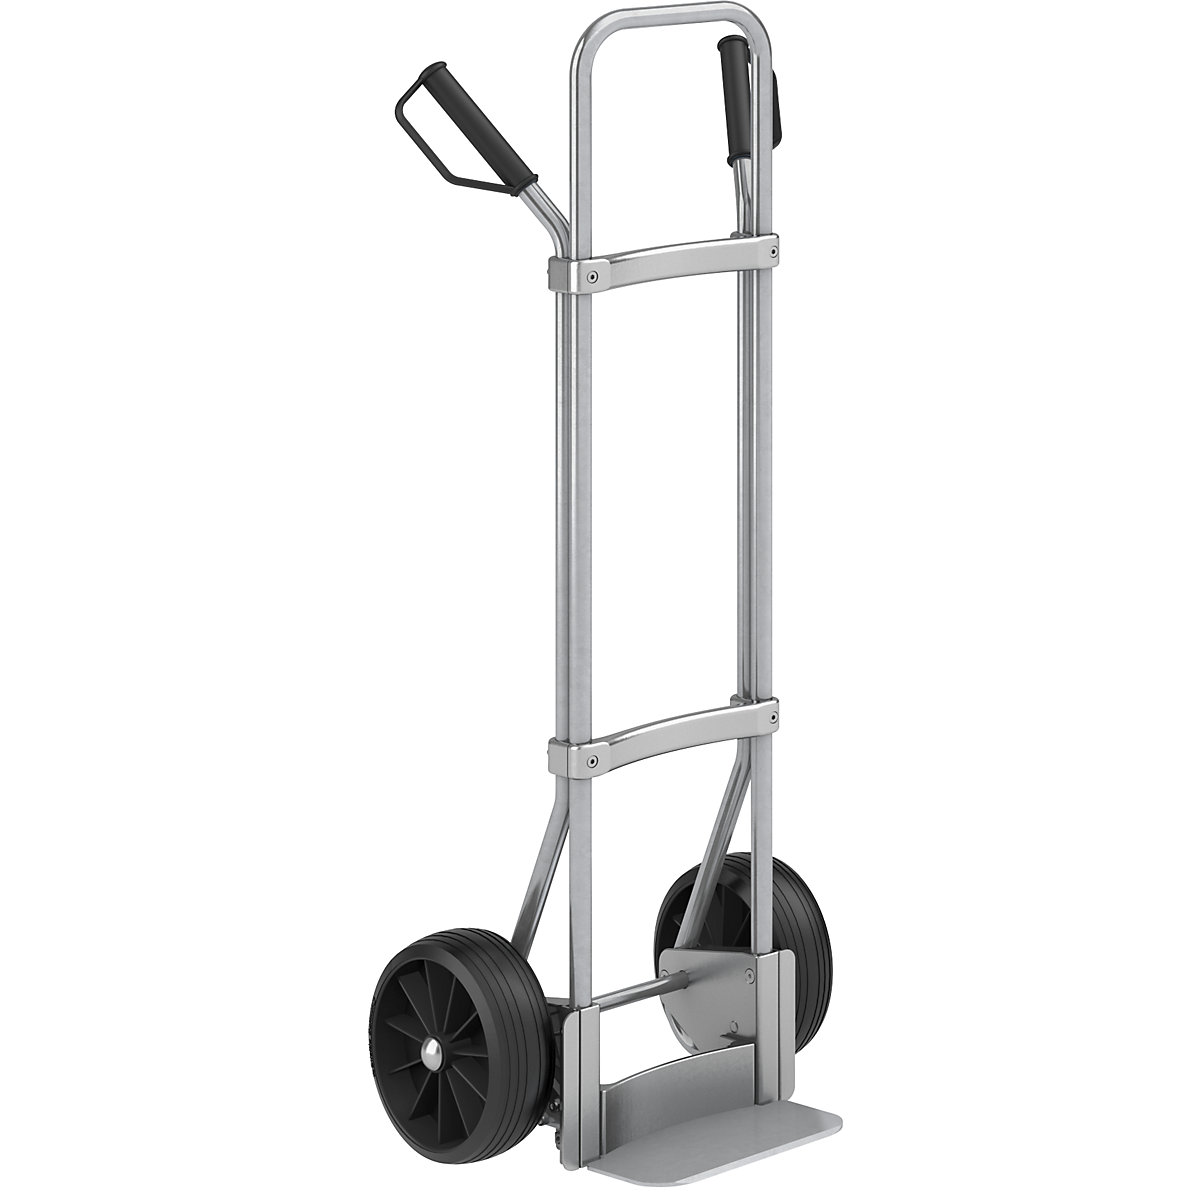 Sack truck, zinc plated – eurokraft pro, footplate WxD 280 x 140 mm, zinc plated, solid rubber tyres, 5+ items-2